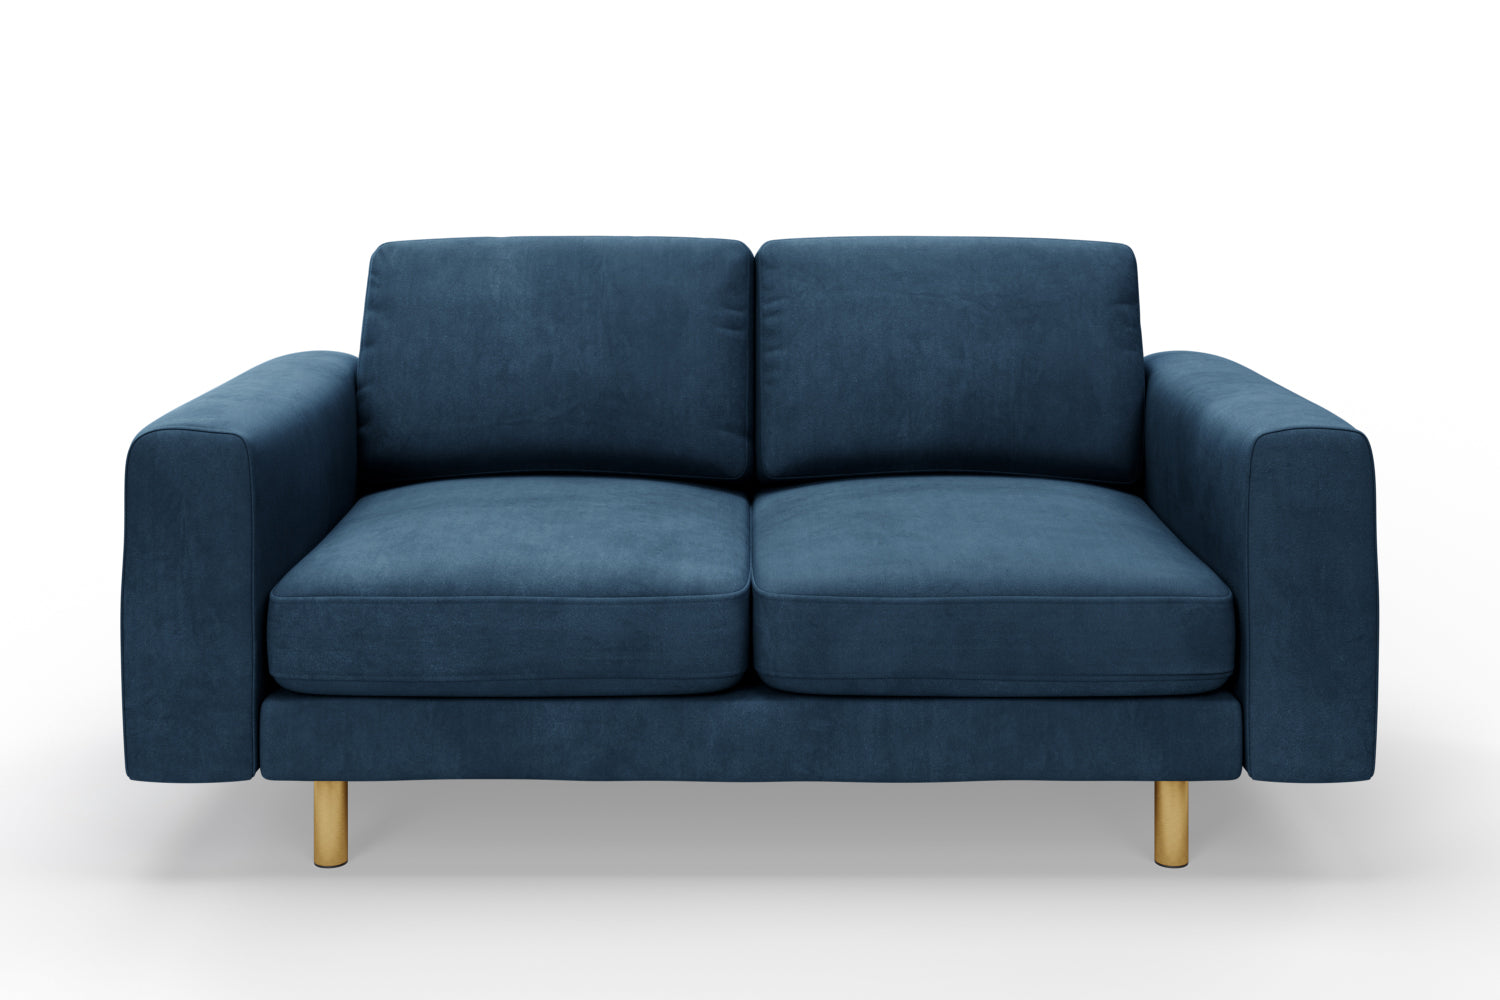 SNUG | The Big Chill 2 Seater Sofa in Blue Steel variant_40414876729392